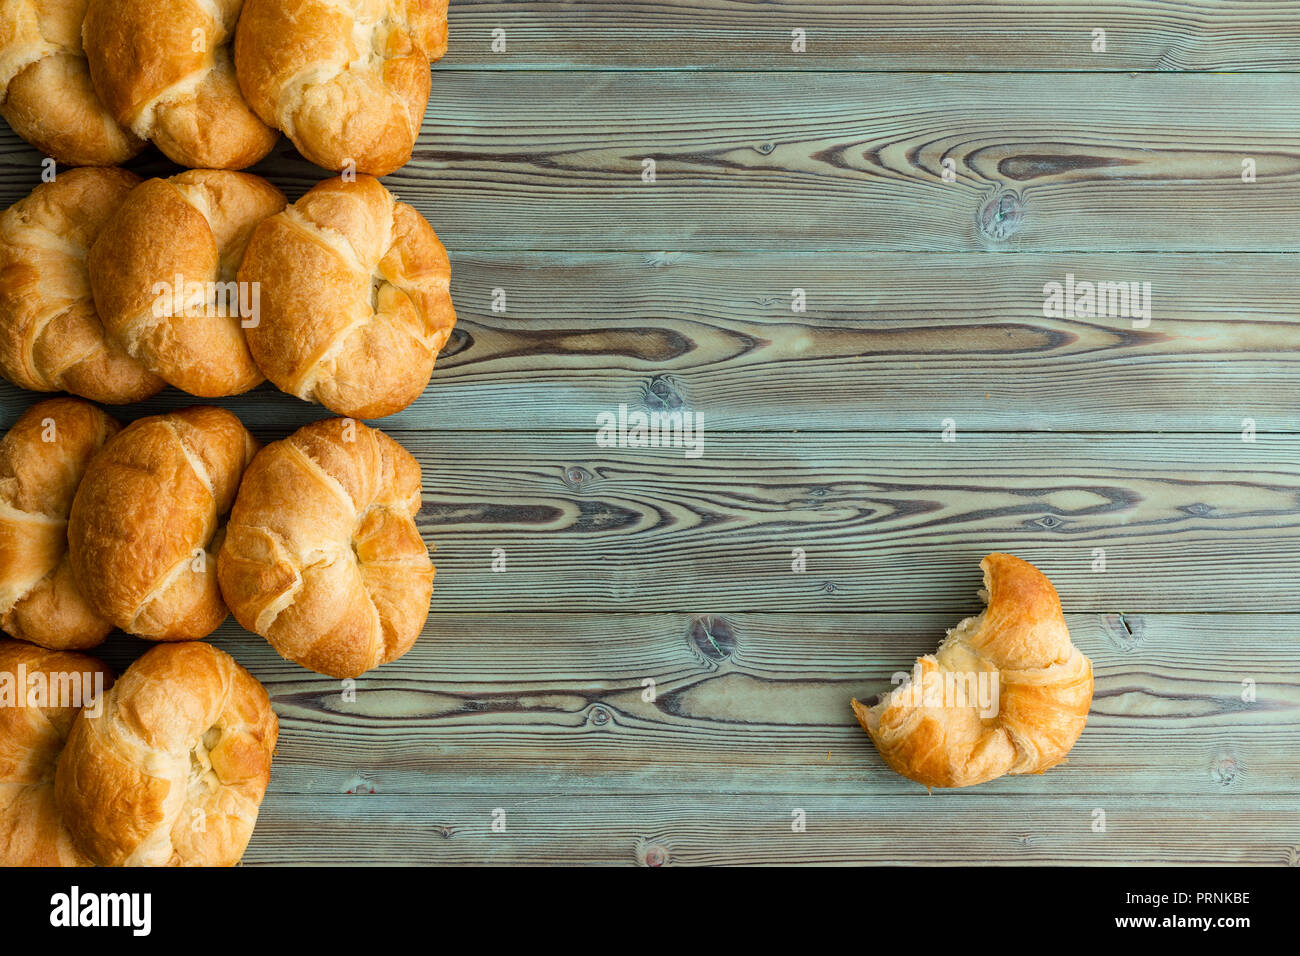 Rows of freshly baked croissants in a side border with a single half eaten croissant to the side on rustic stained wood with copy space Stock Photo